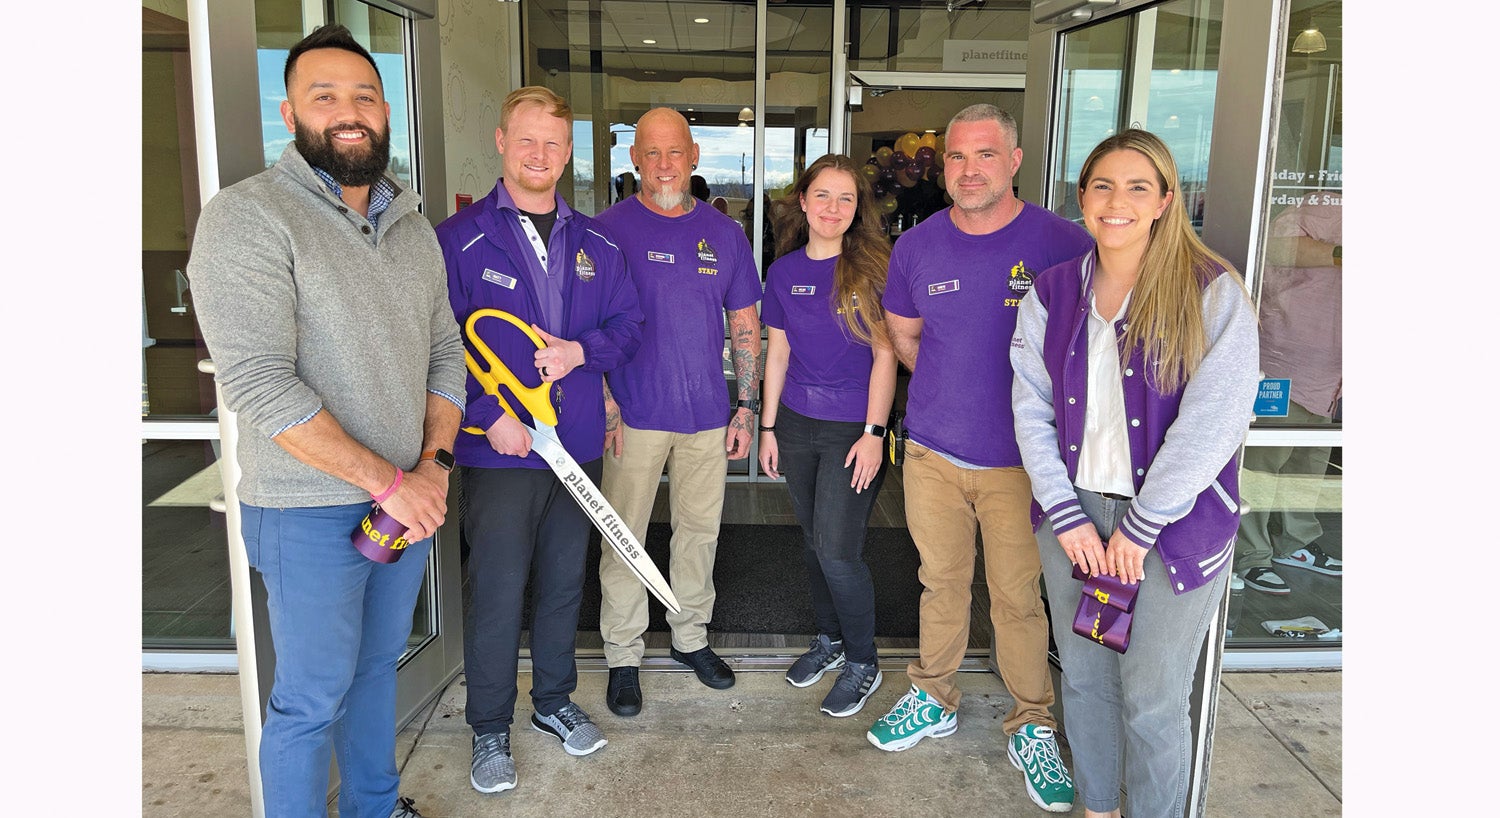 Planet Fitness celebrates grand opening with ribbon cutting, $5K